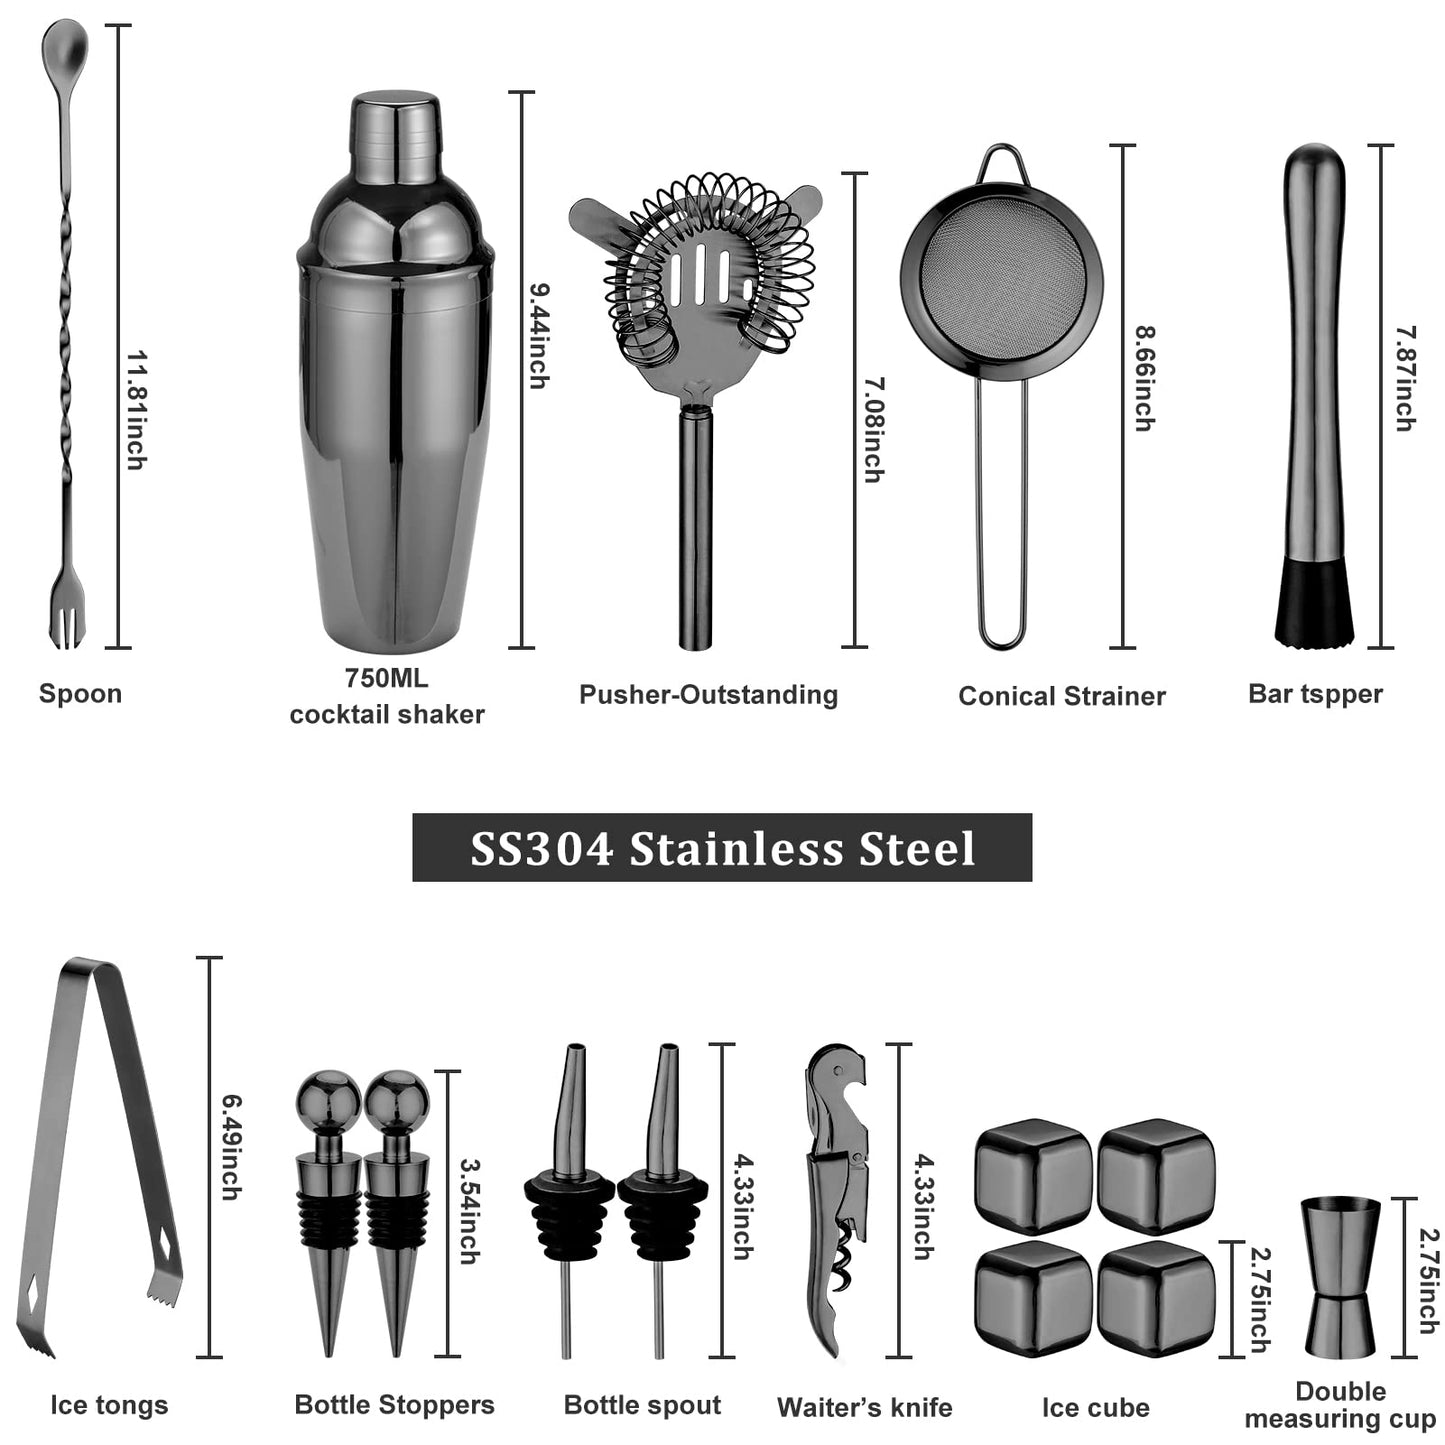 Oyydecor 18 Piece Cocktail Shaker Set with Rustic Pine Stand, Gifts for Men Dad Grandpa, Stainless Steel Bartender Kit Bar Tools Set, Home, Bars, Parties and Traveling (Black)